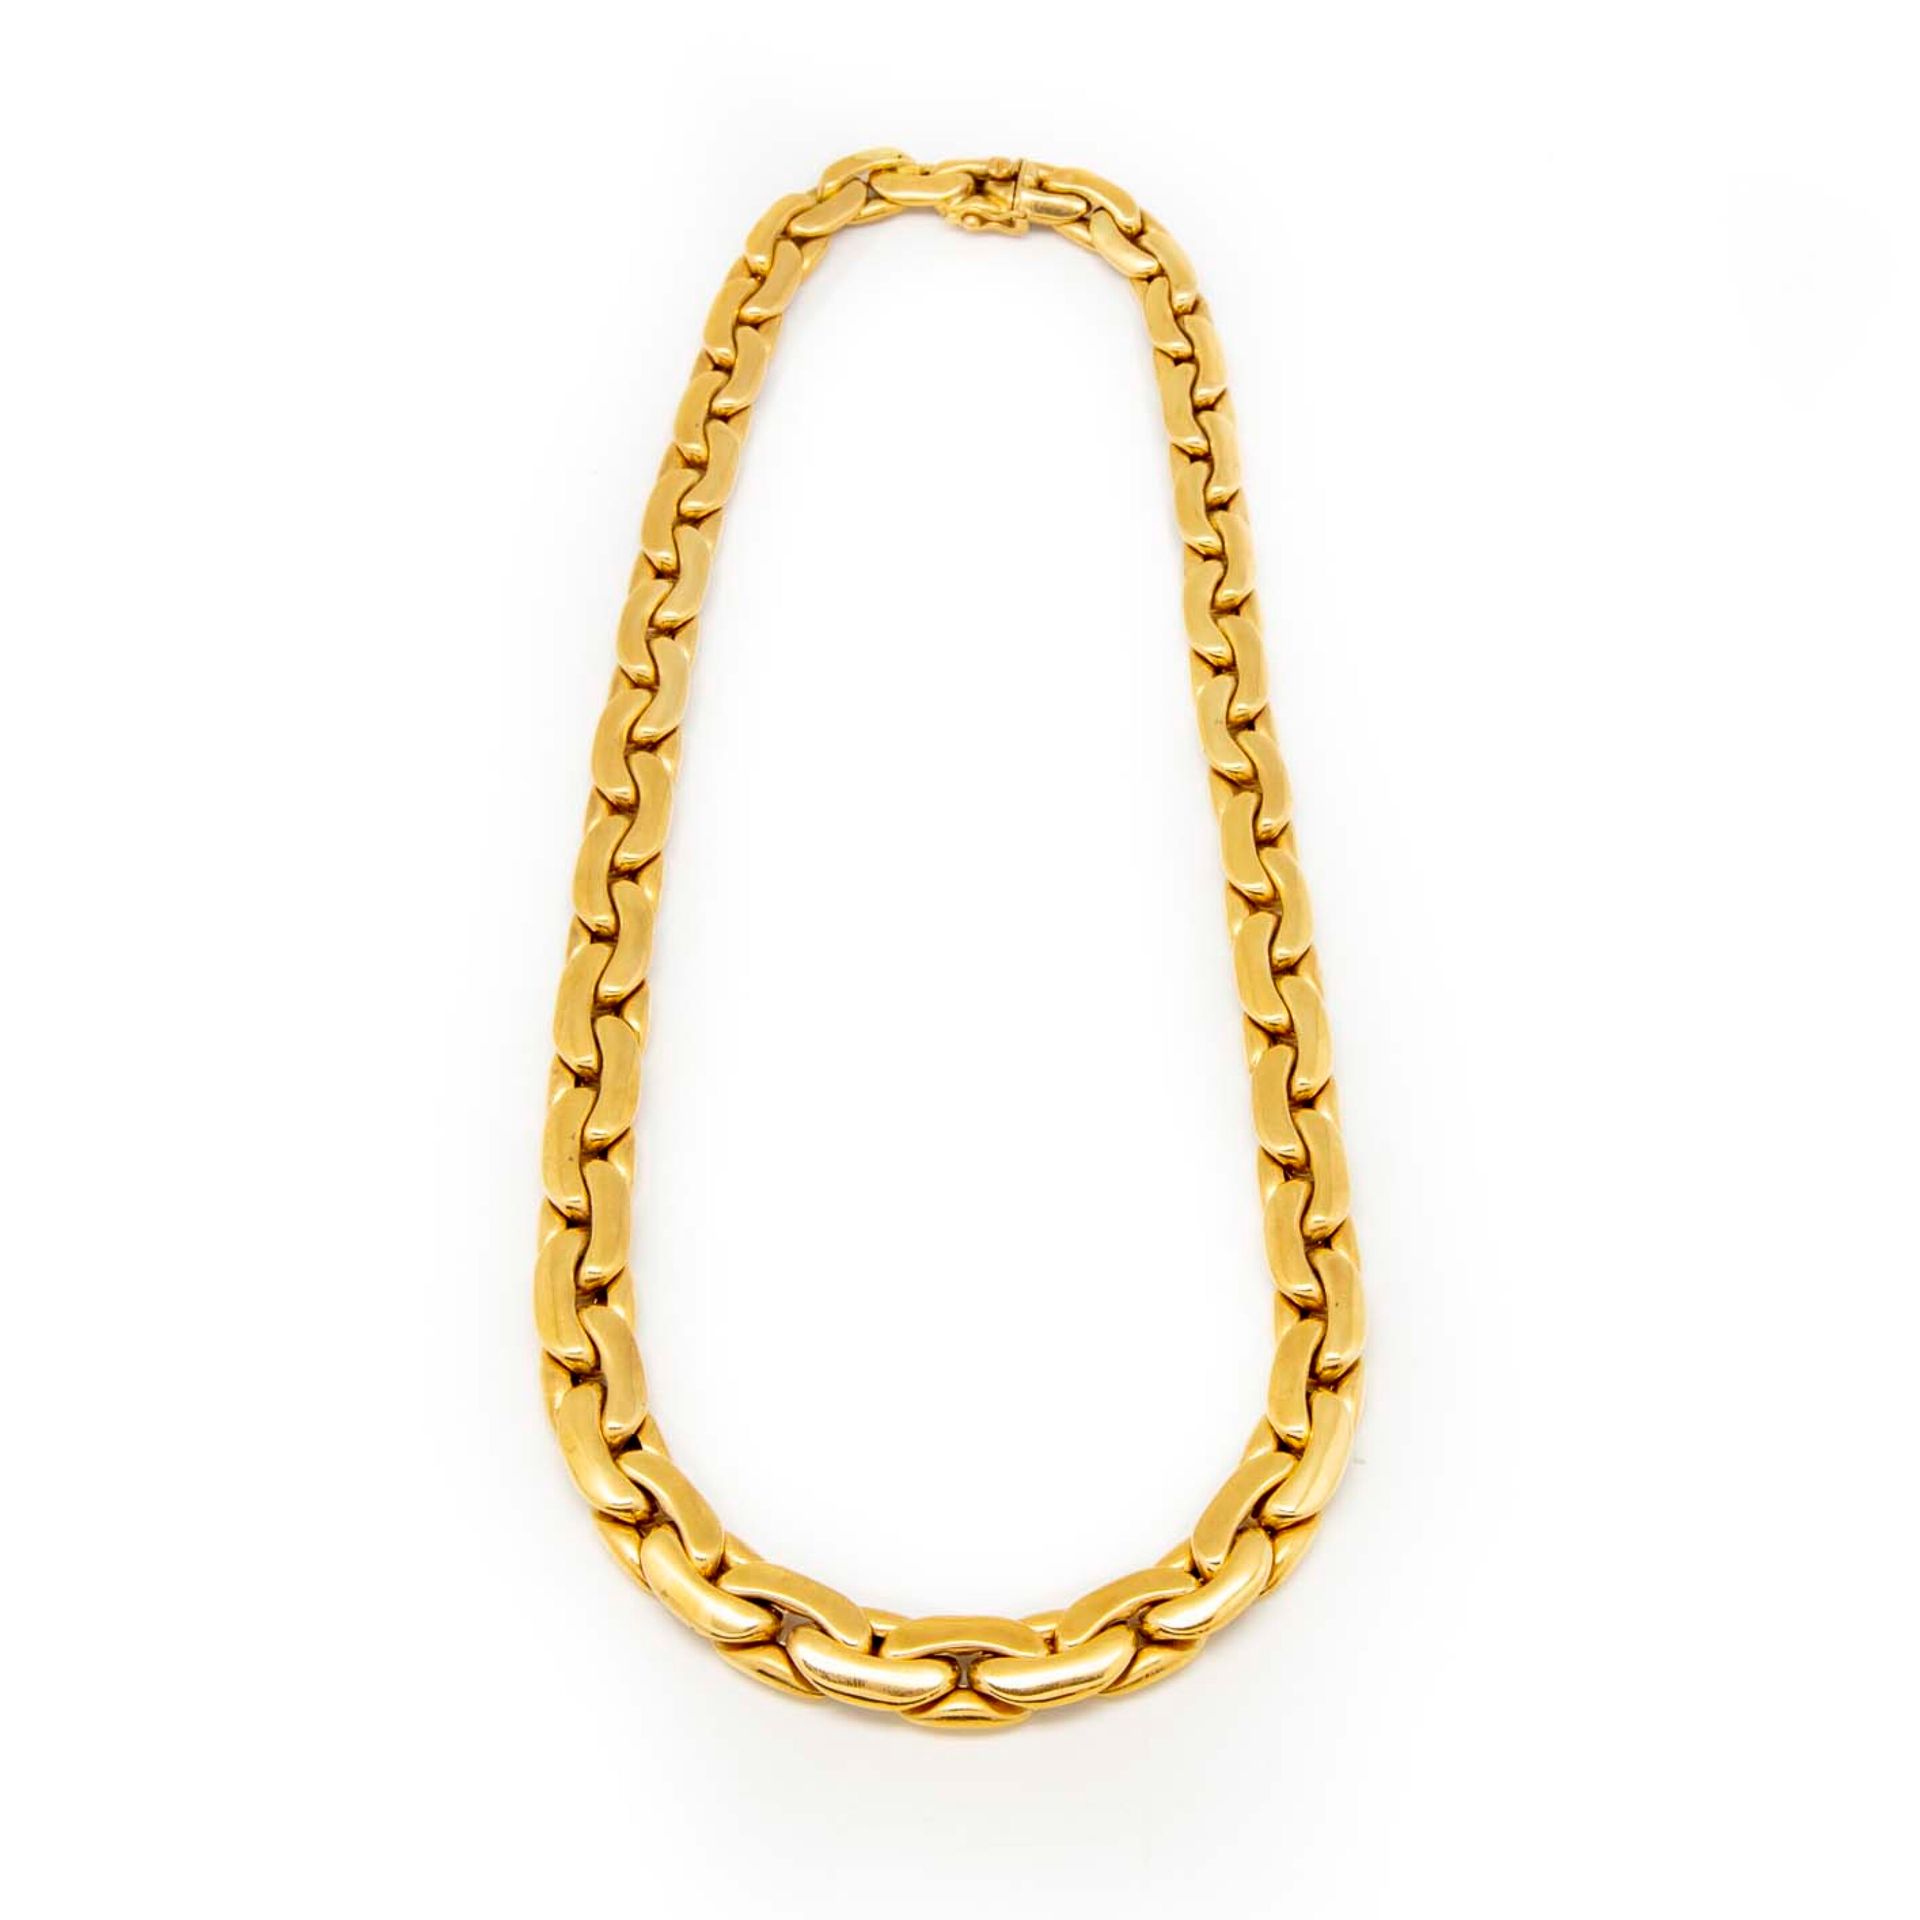 Null Yellow gold necklace with flat articulated links

Weight : 62 g.